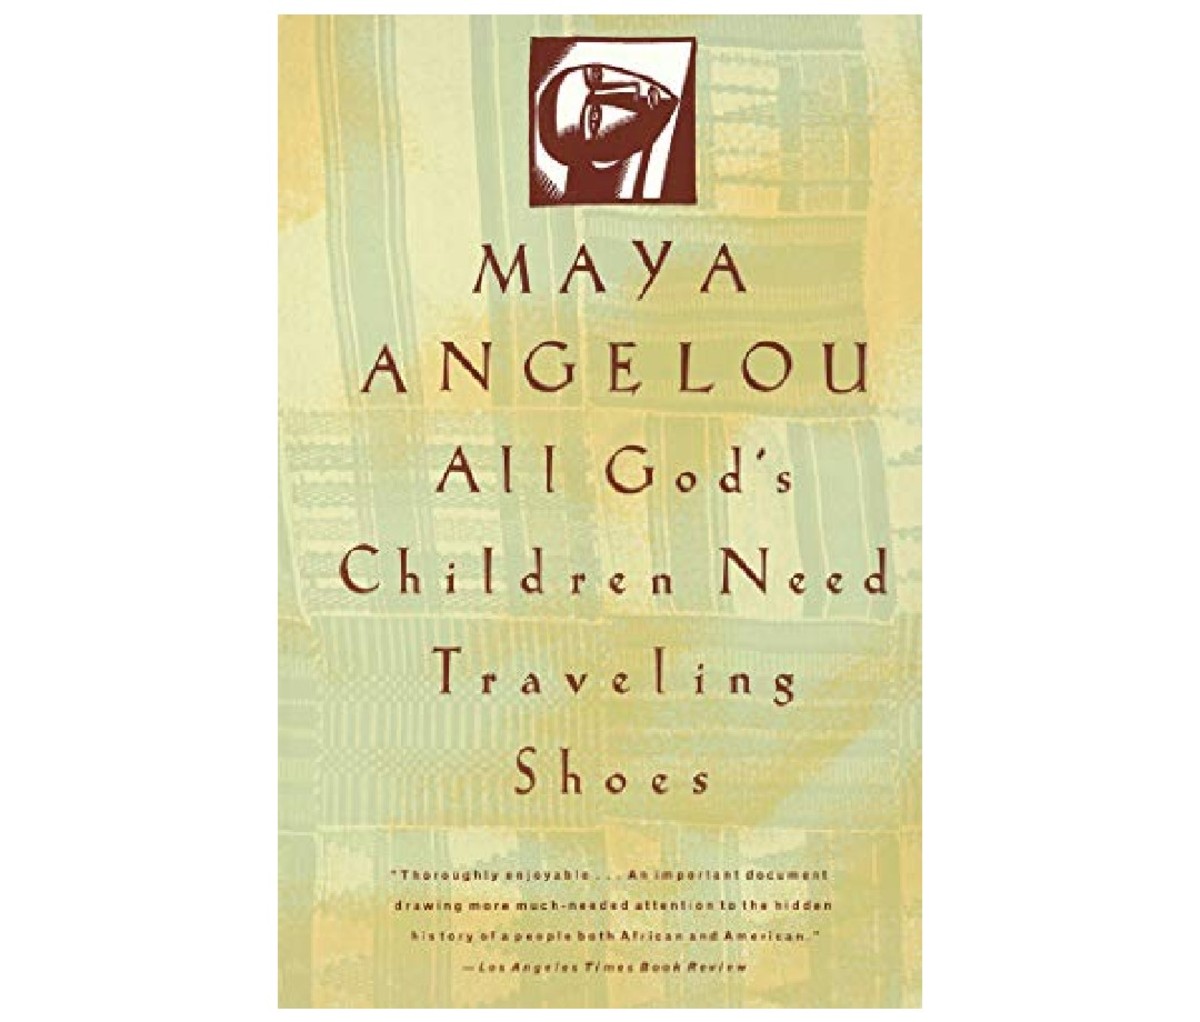 The book cover of All God's Children Need Traveling Shoes by Maya Angelou